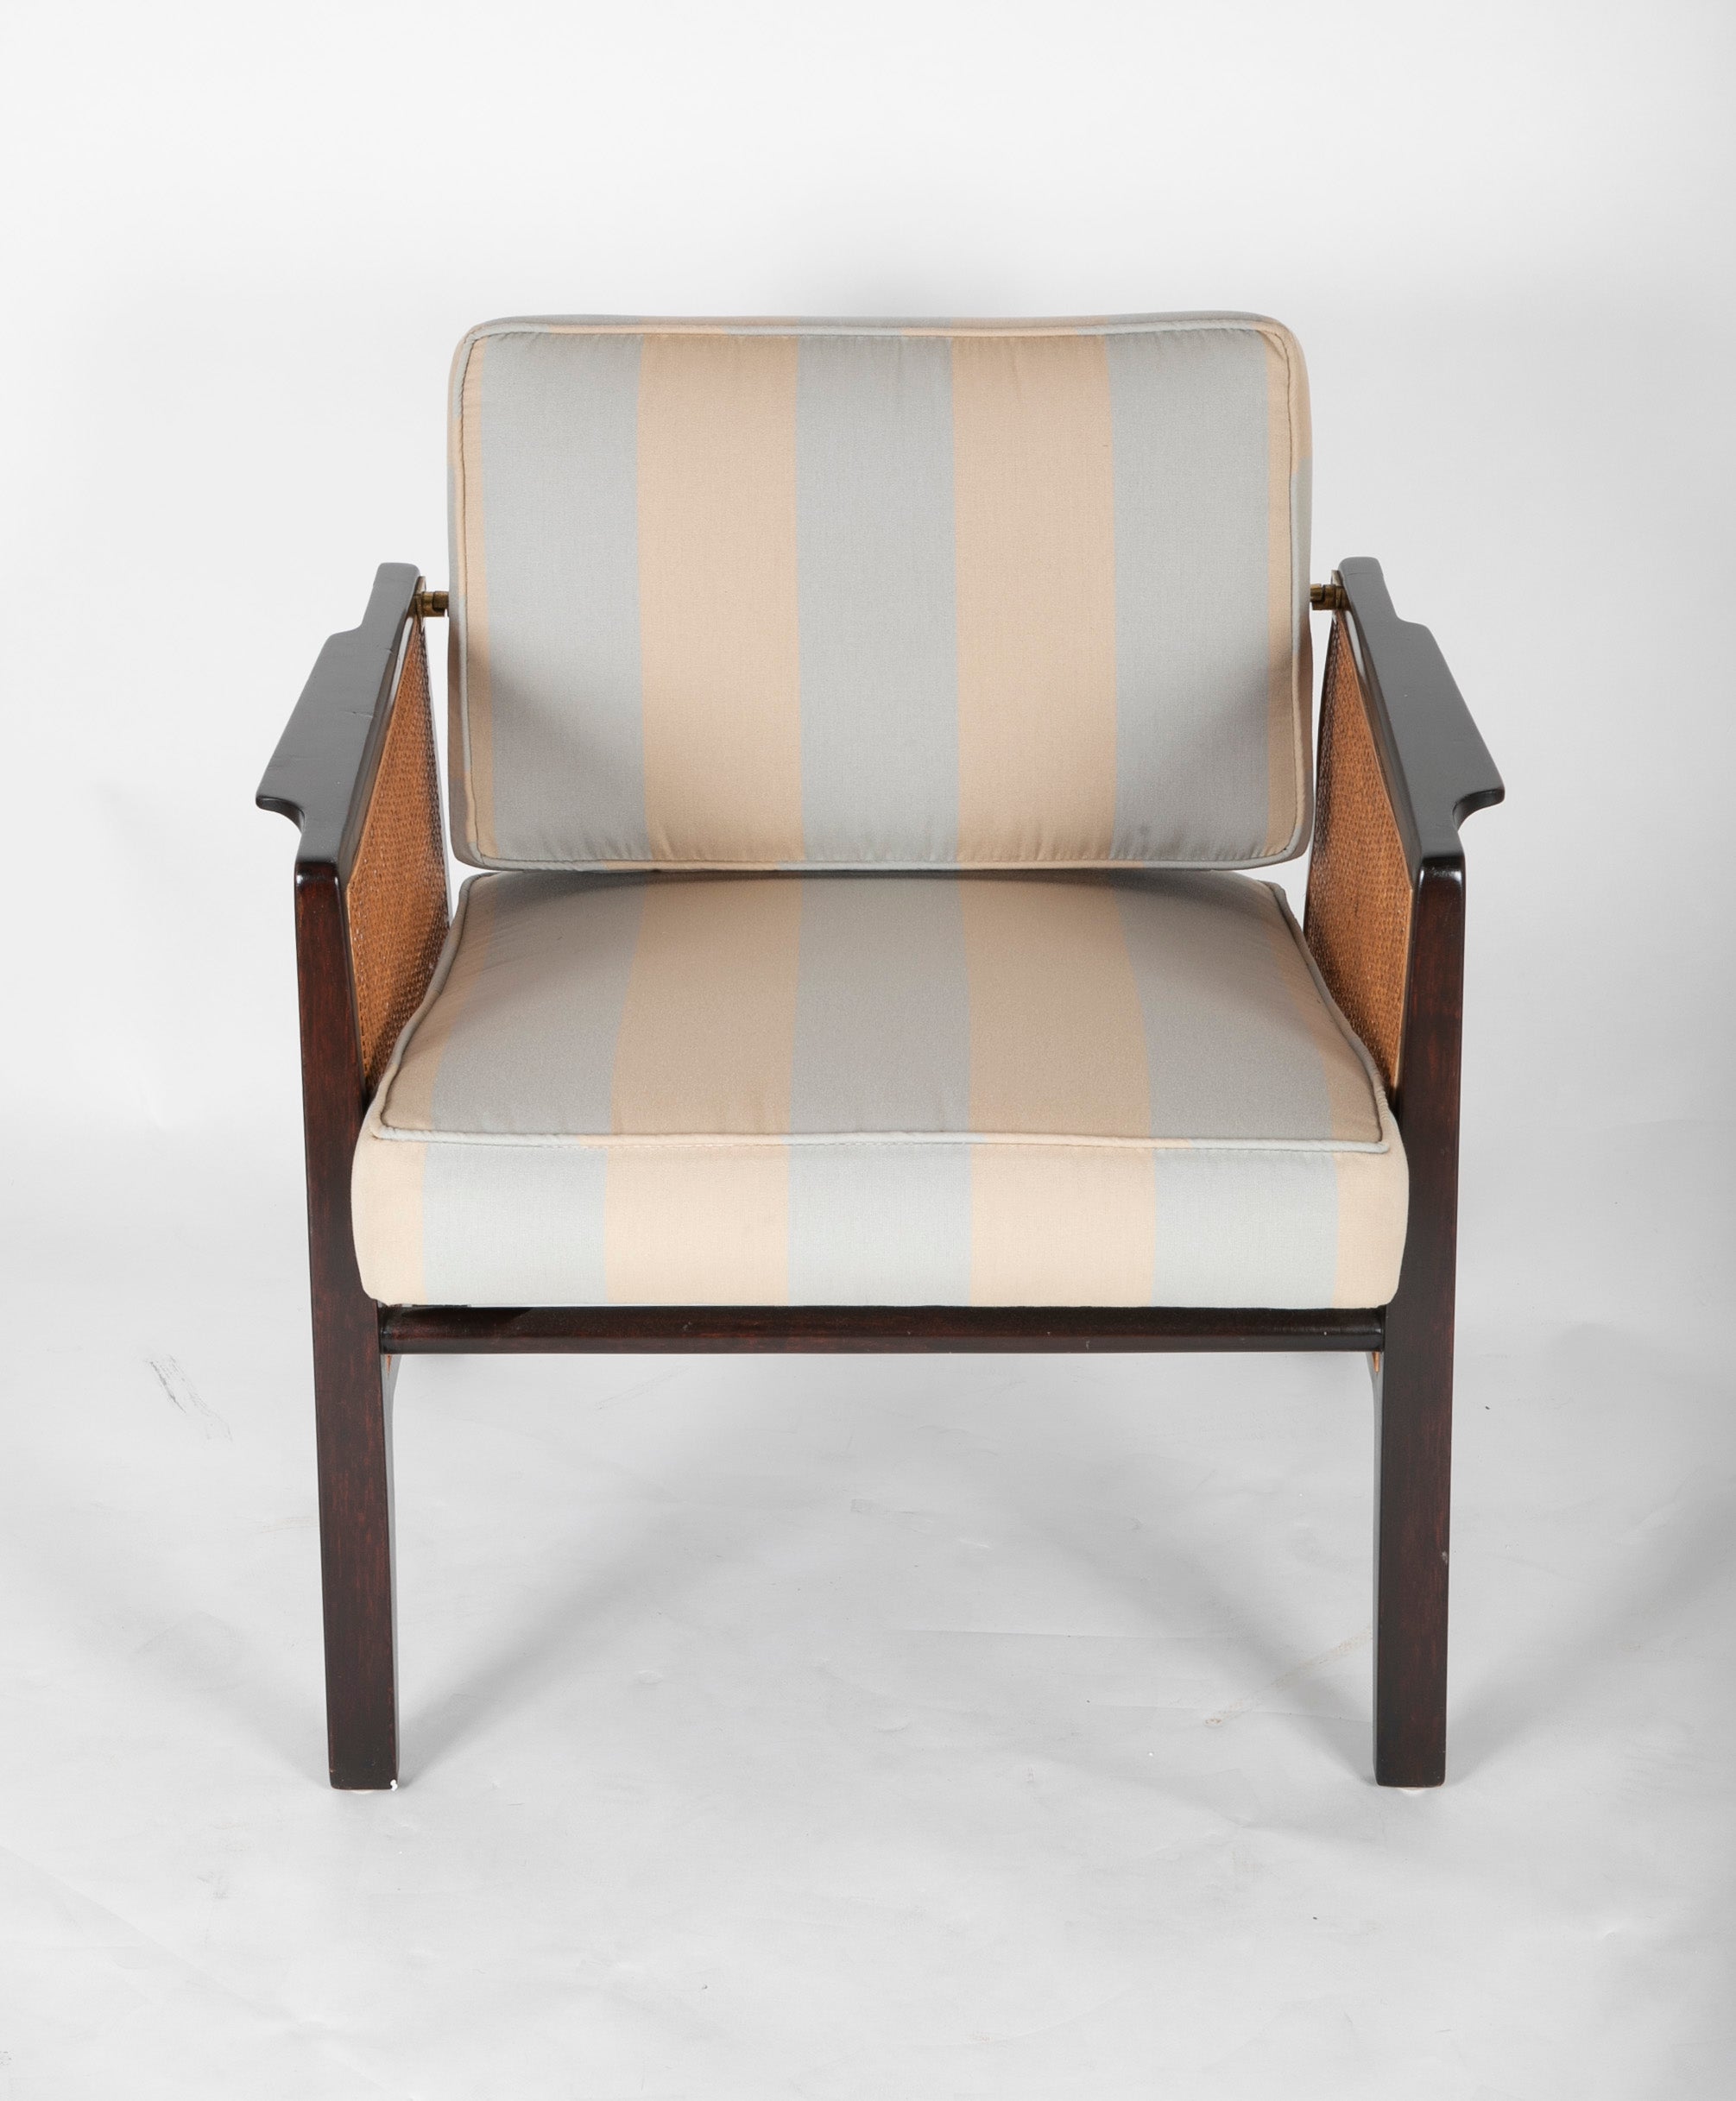 Caned and Ebonized Arm Chair Designed by Edward Wormley